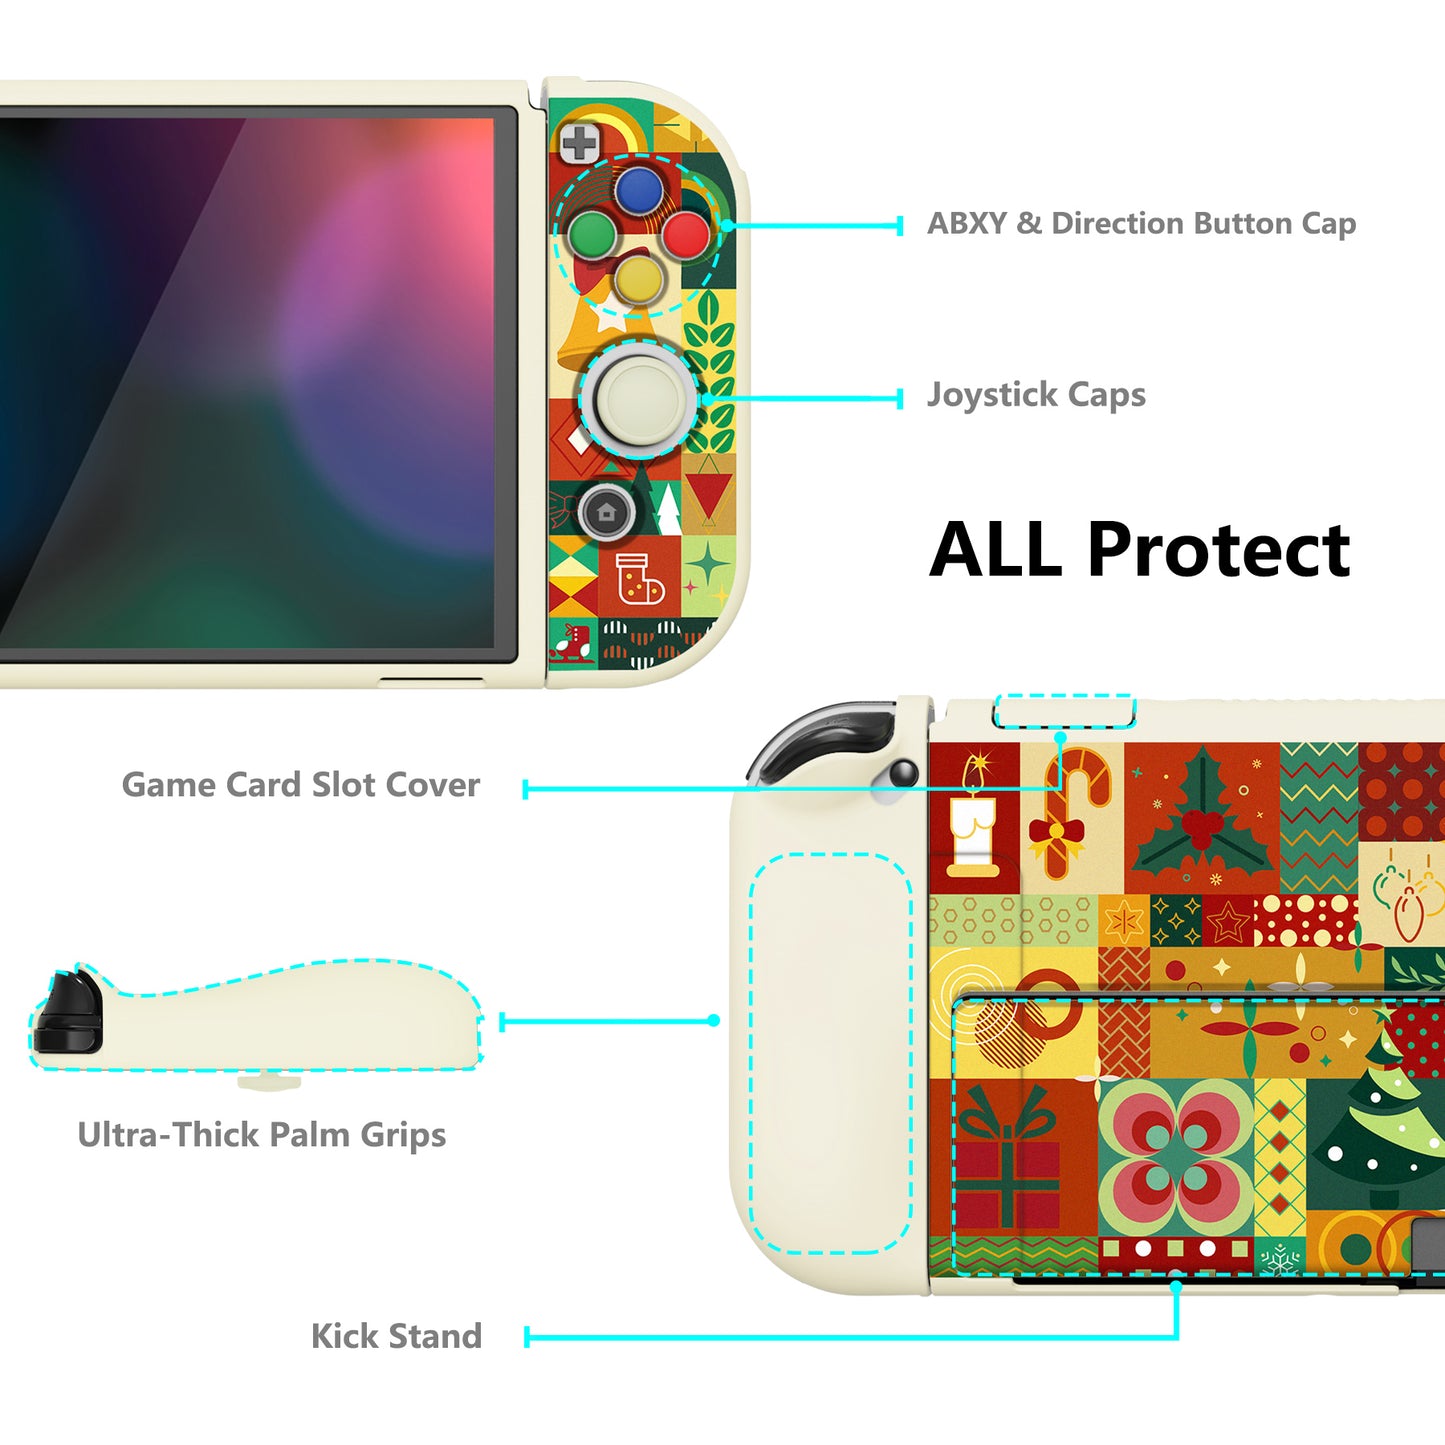 PlayVital ZealProtect Soft Protective Case for Switch OLED, Flexible Protector Grip Cover for Switch OLED with Thumb Grip Caps & ABXY Direction Button Caps - Christmas Wrap - XSOYV6047